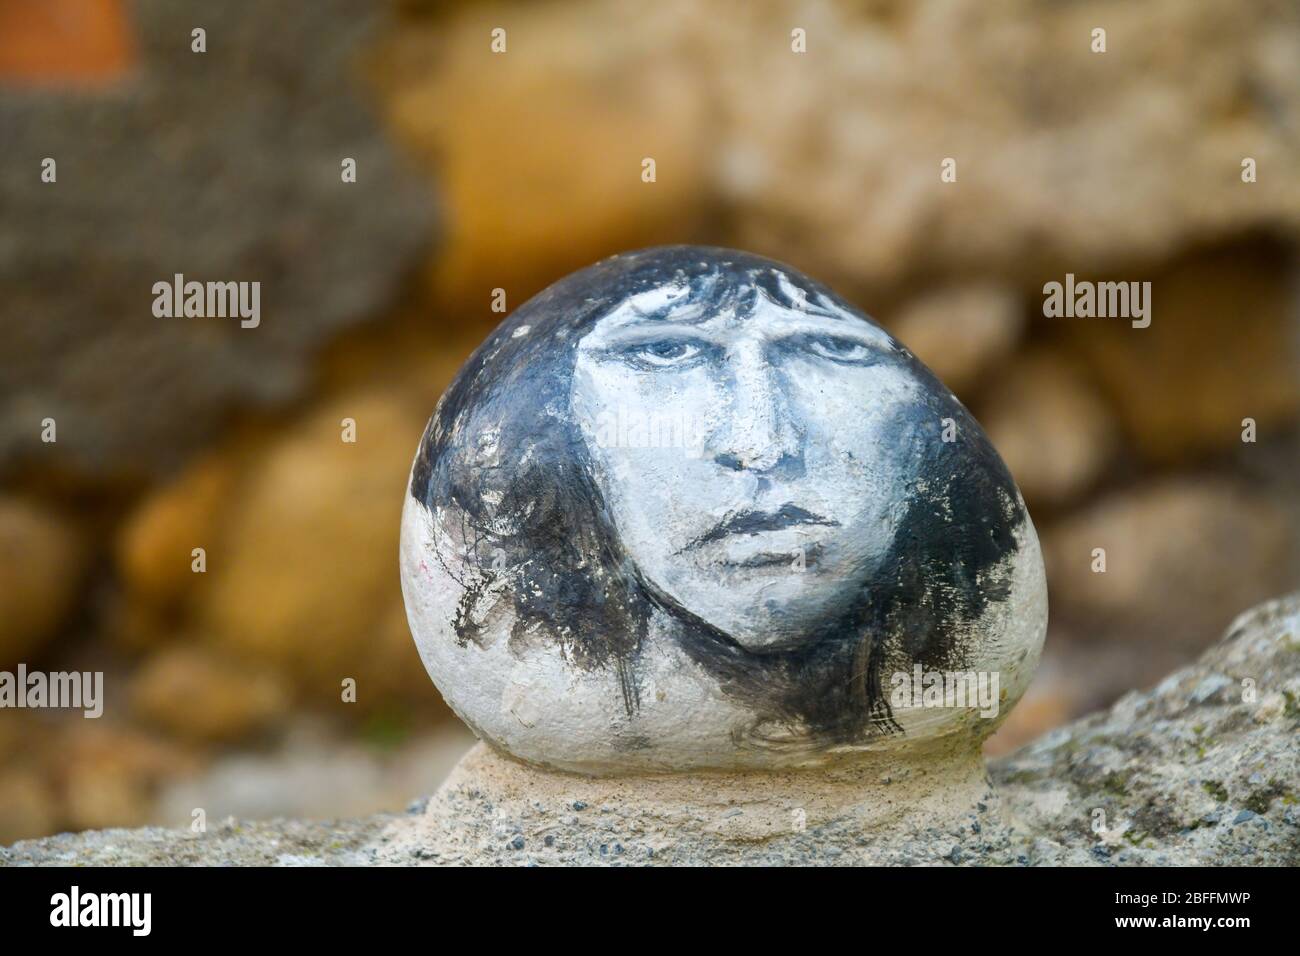 Close-up of a hand-painted stone with the portrait of Jim Morrison, lead vocalist of the rock band the Doors, Bussana Vecchia, Imperia, Liguria, Italy Stock Photo